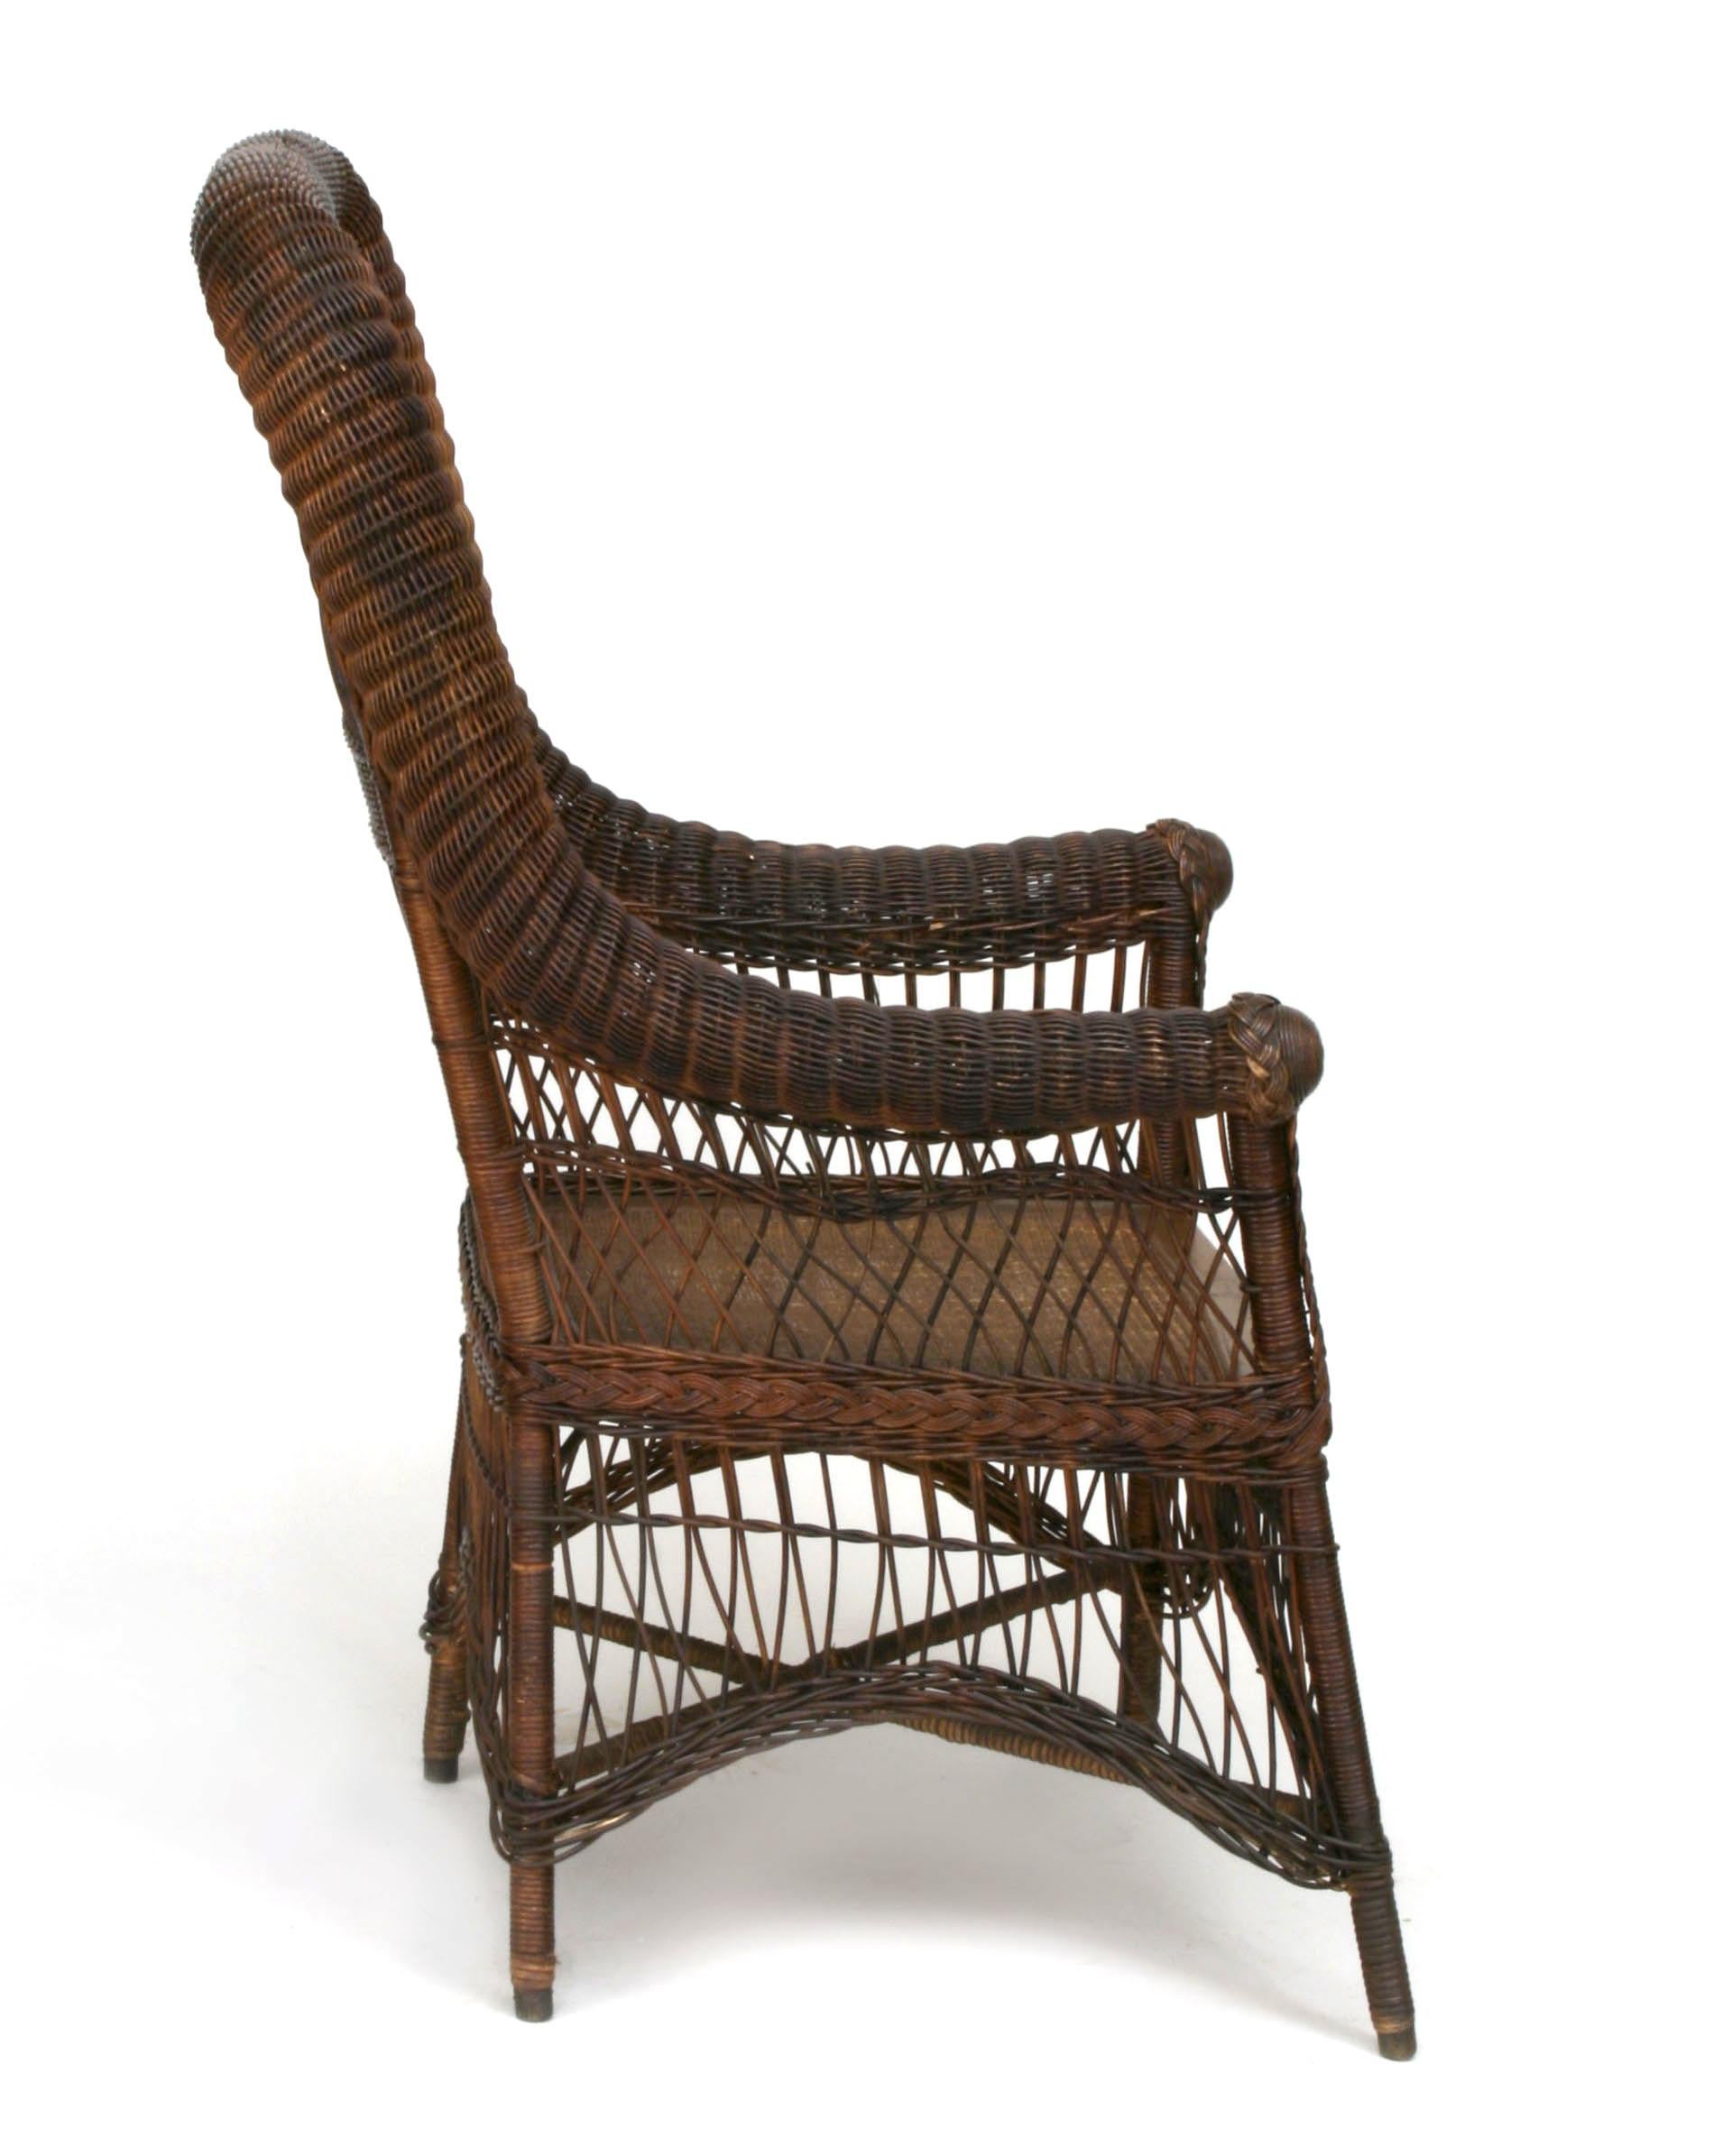 American Victorian/Mission dark stained wicker arm chair with a high rounded back and arch design under seat. (att: HAYWOOD WAKEFIELD)
